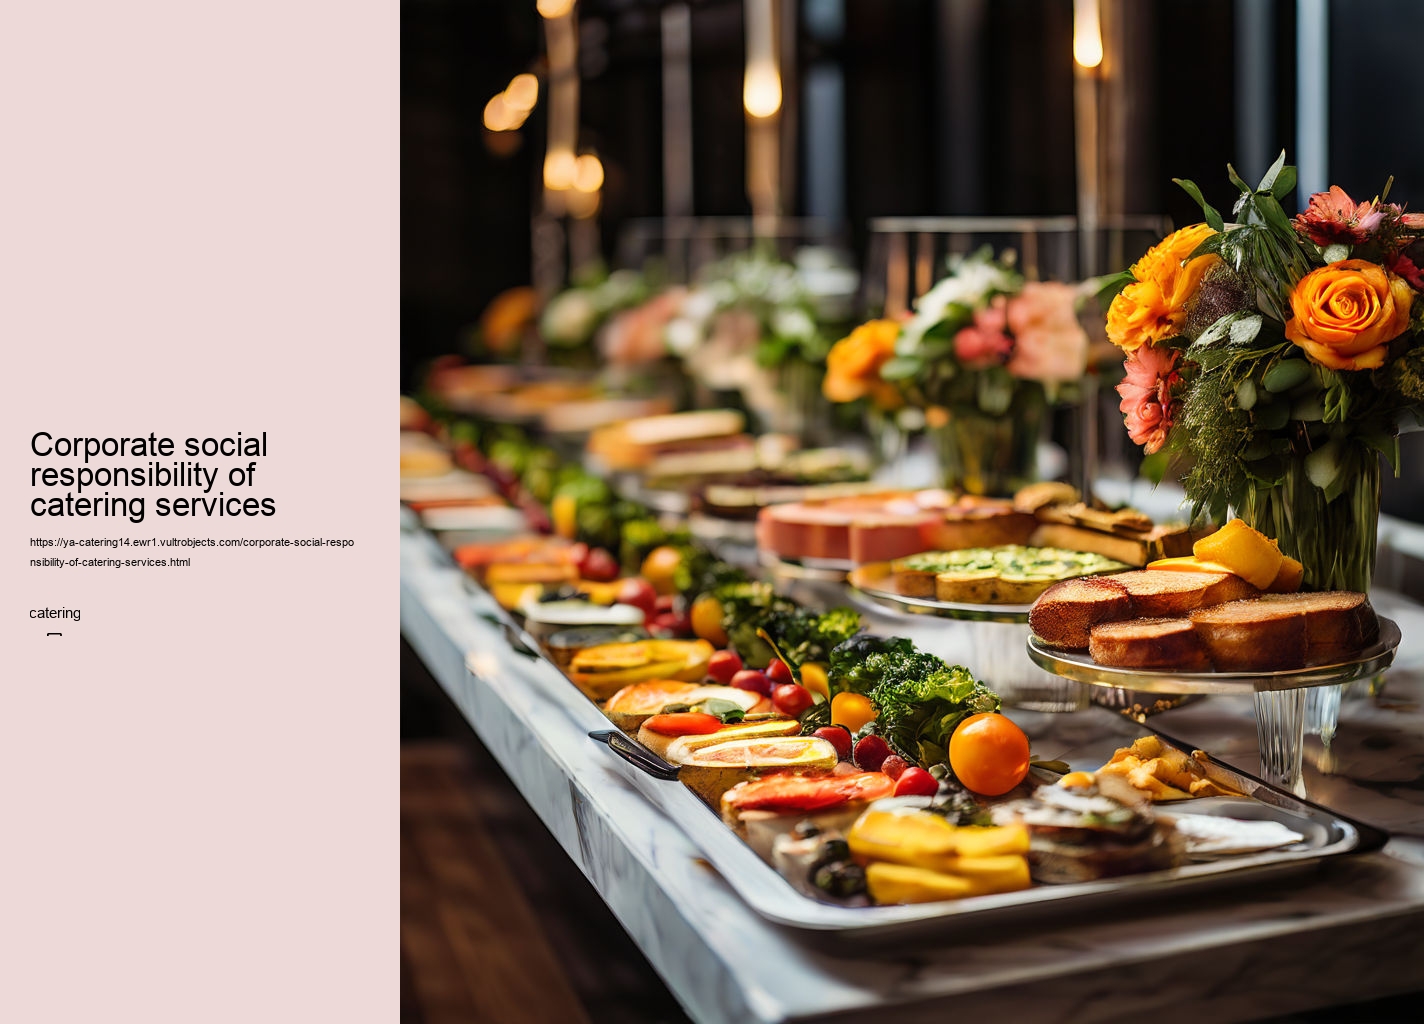 Corporate social responsibility of catering services